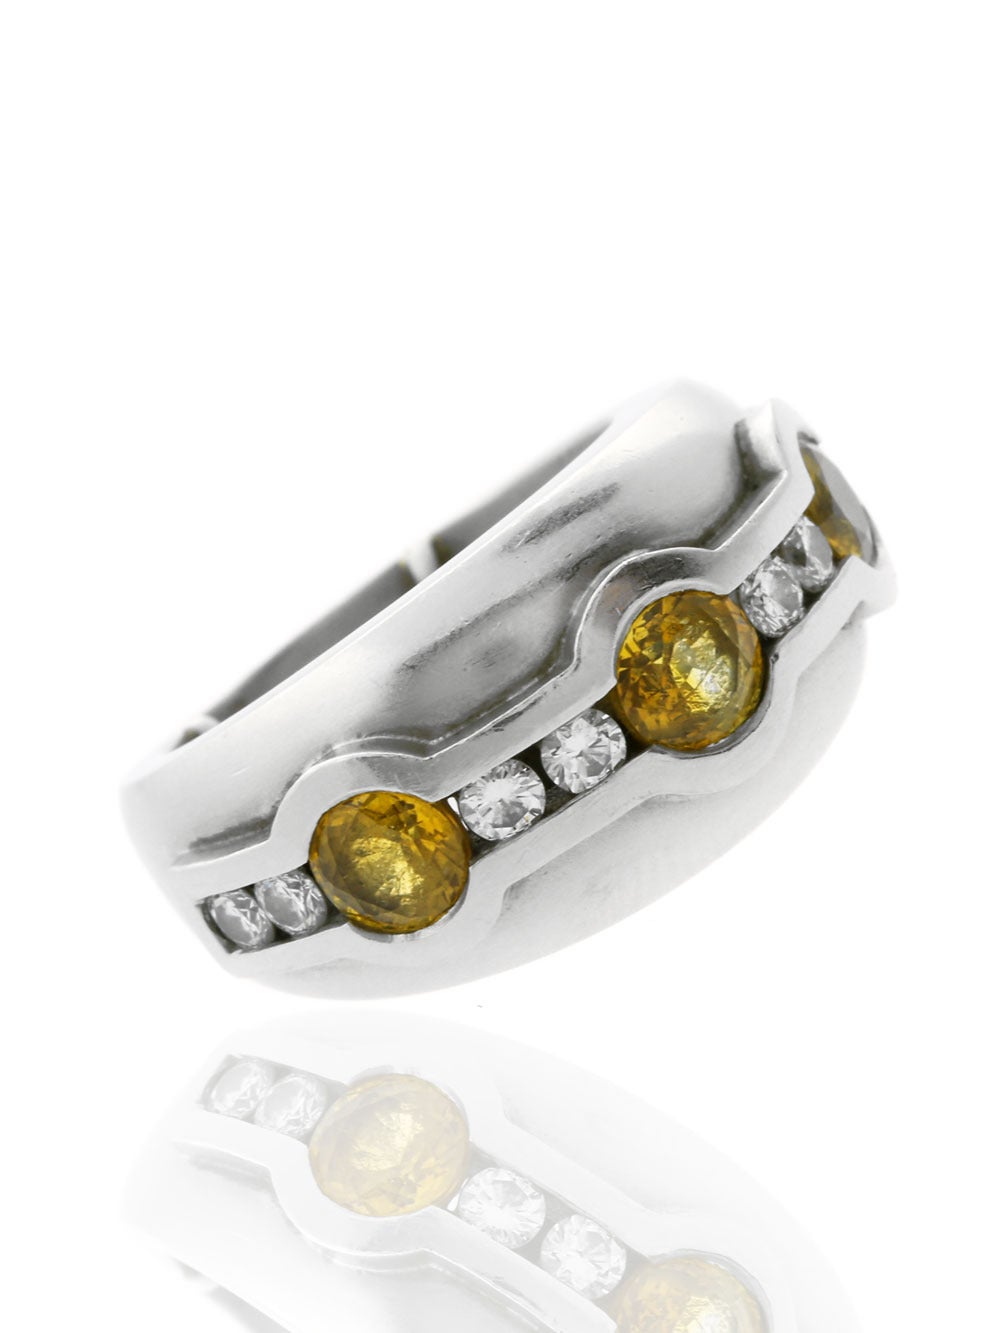 A beautiful dome style ring by Barry Kieselstein-Cord featuring 8 Round Brilliant Cut Diamonds, set in between 3 Yellow Sapphires. The ring is crafted in Platinum, Sz 5, and has a total weight of 24.1 grams.